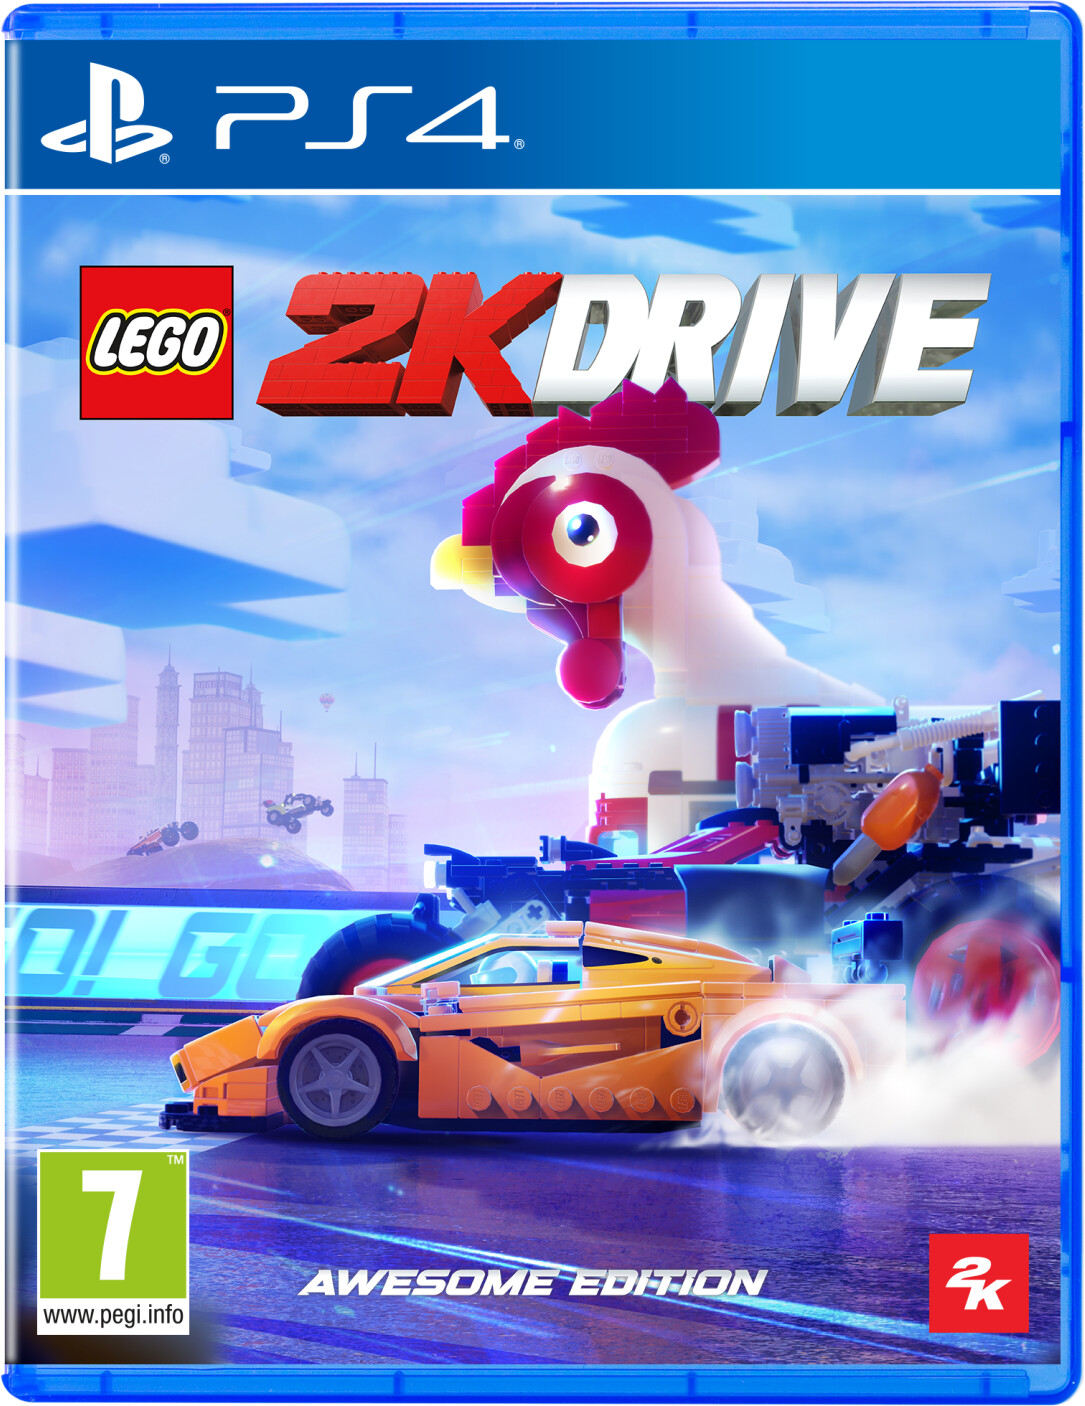 Photos - Game Take 2 LEGO 2K Drive: Awesome Edition (PS4)